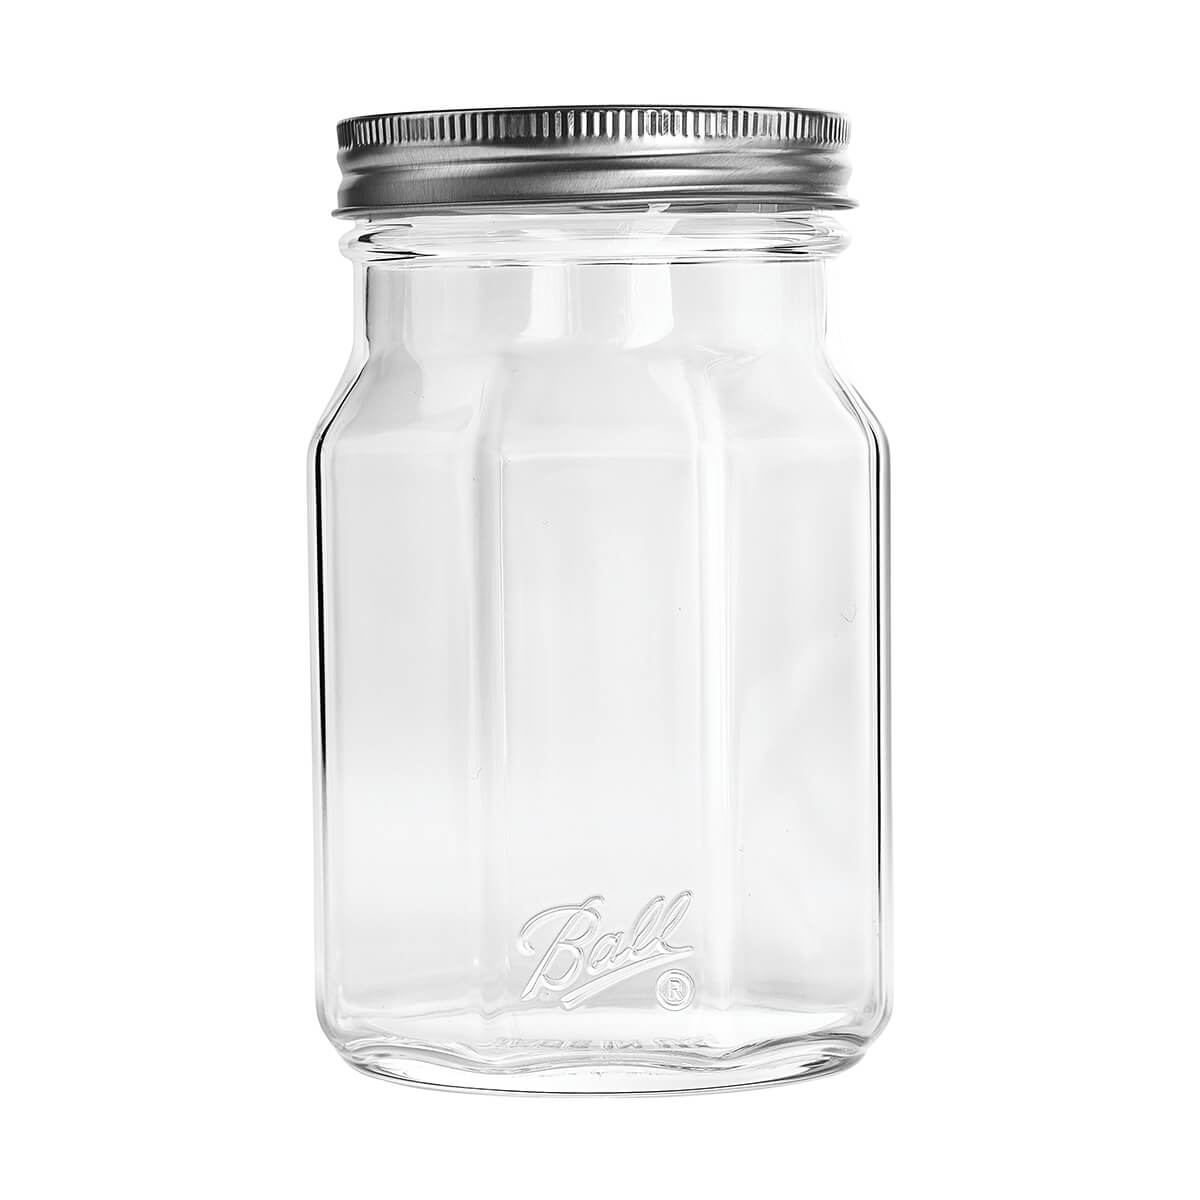 Ball Jars Quart Wide Mouth Elite Sharing Collection - 4 pack